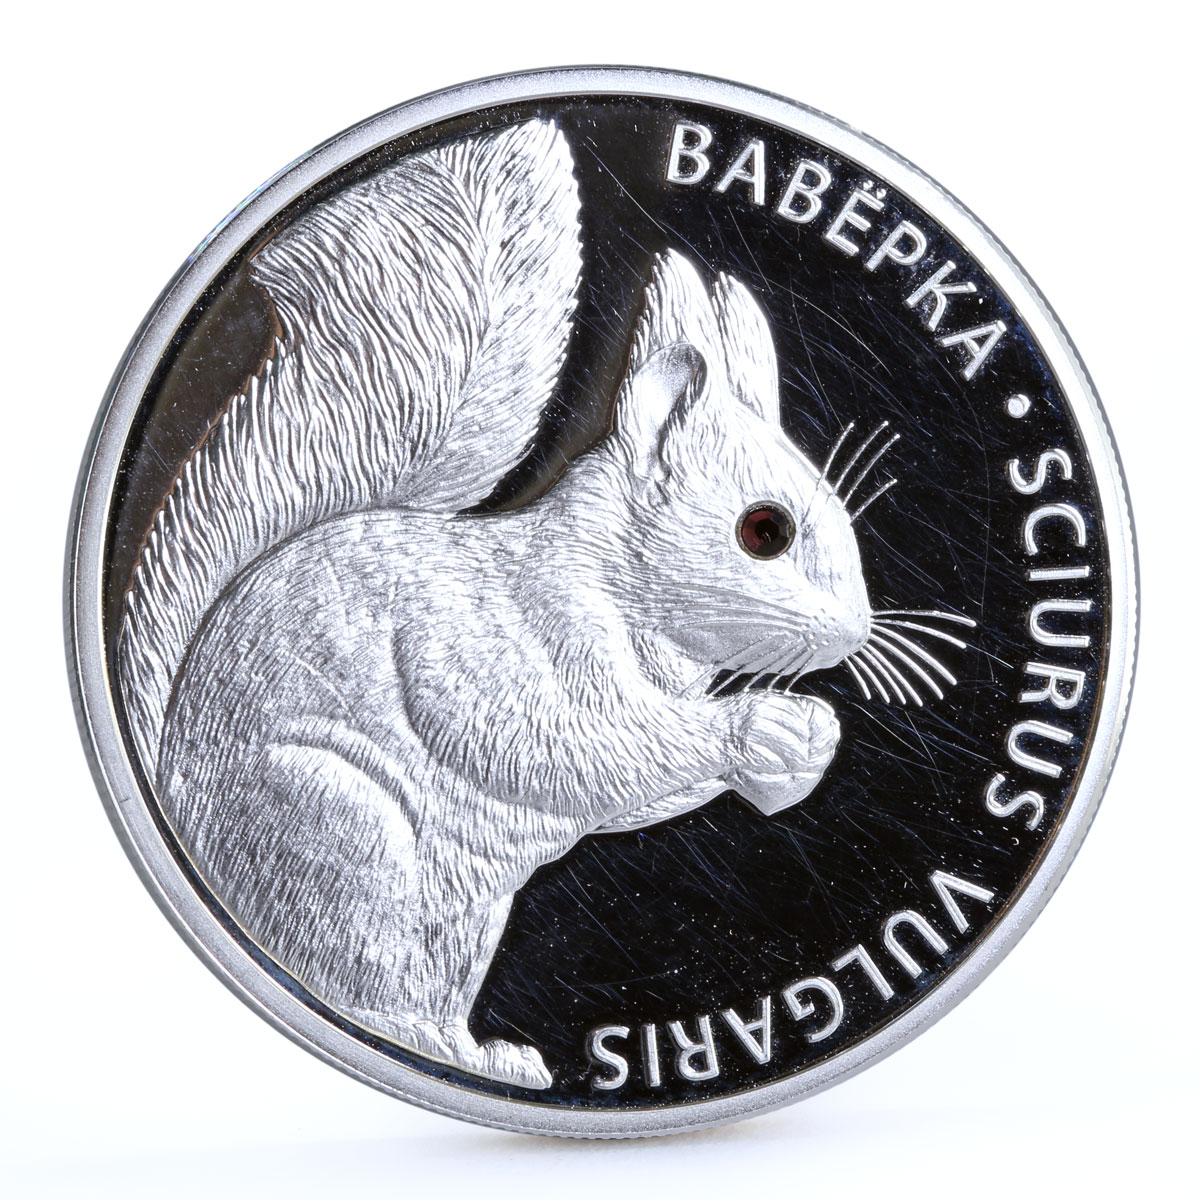 Belarus 20 rubles Endangered Wildlife Squirrel Fauna proof silver coin 2009